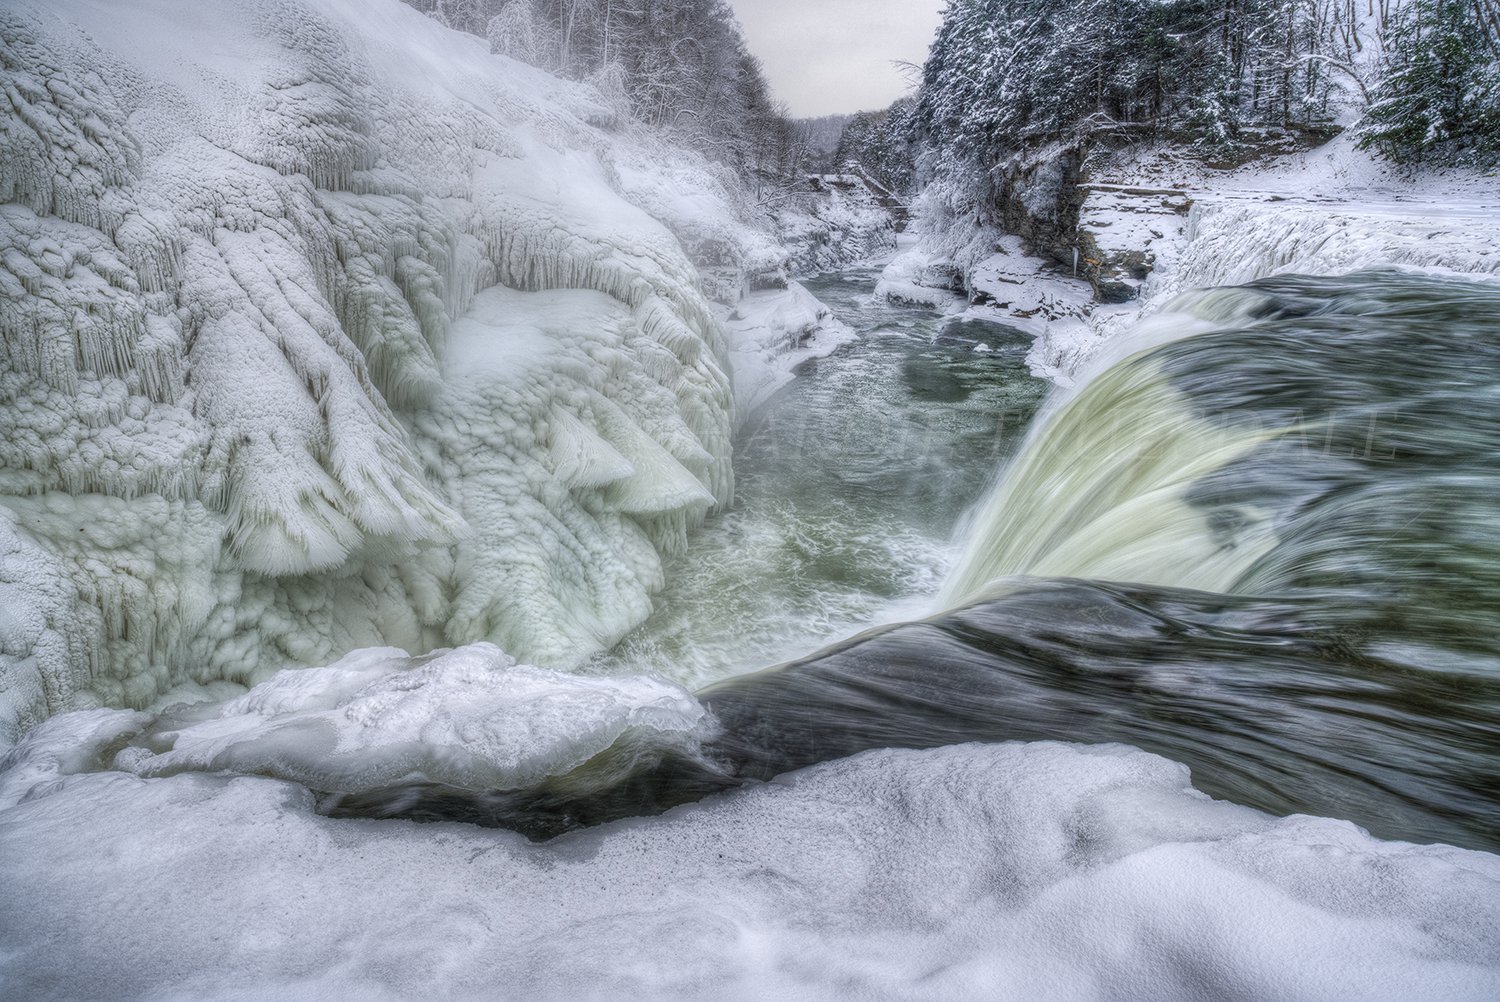 WNY#72 Frozen Water, Lower Falls, Letchworth State Park